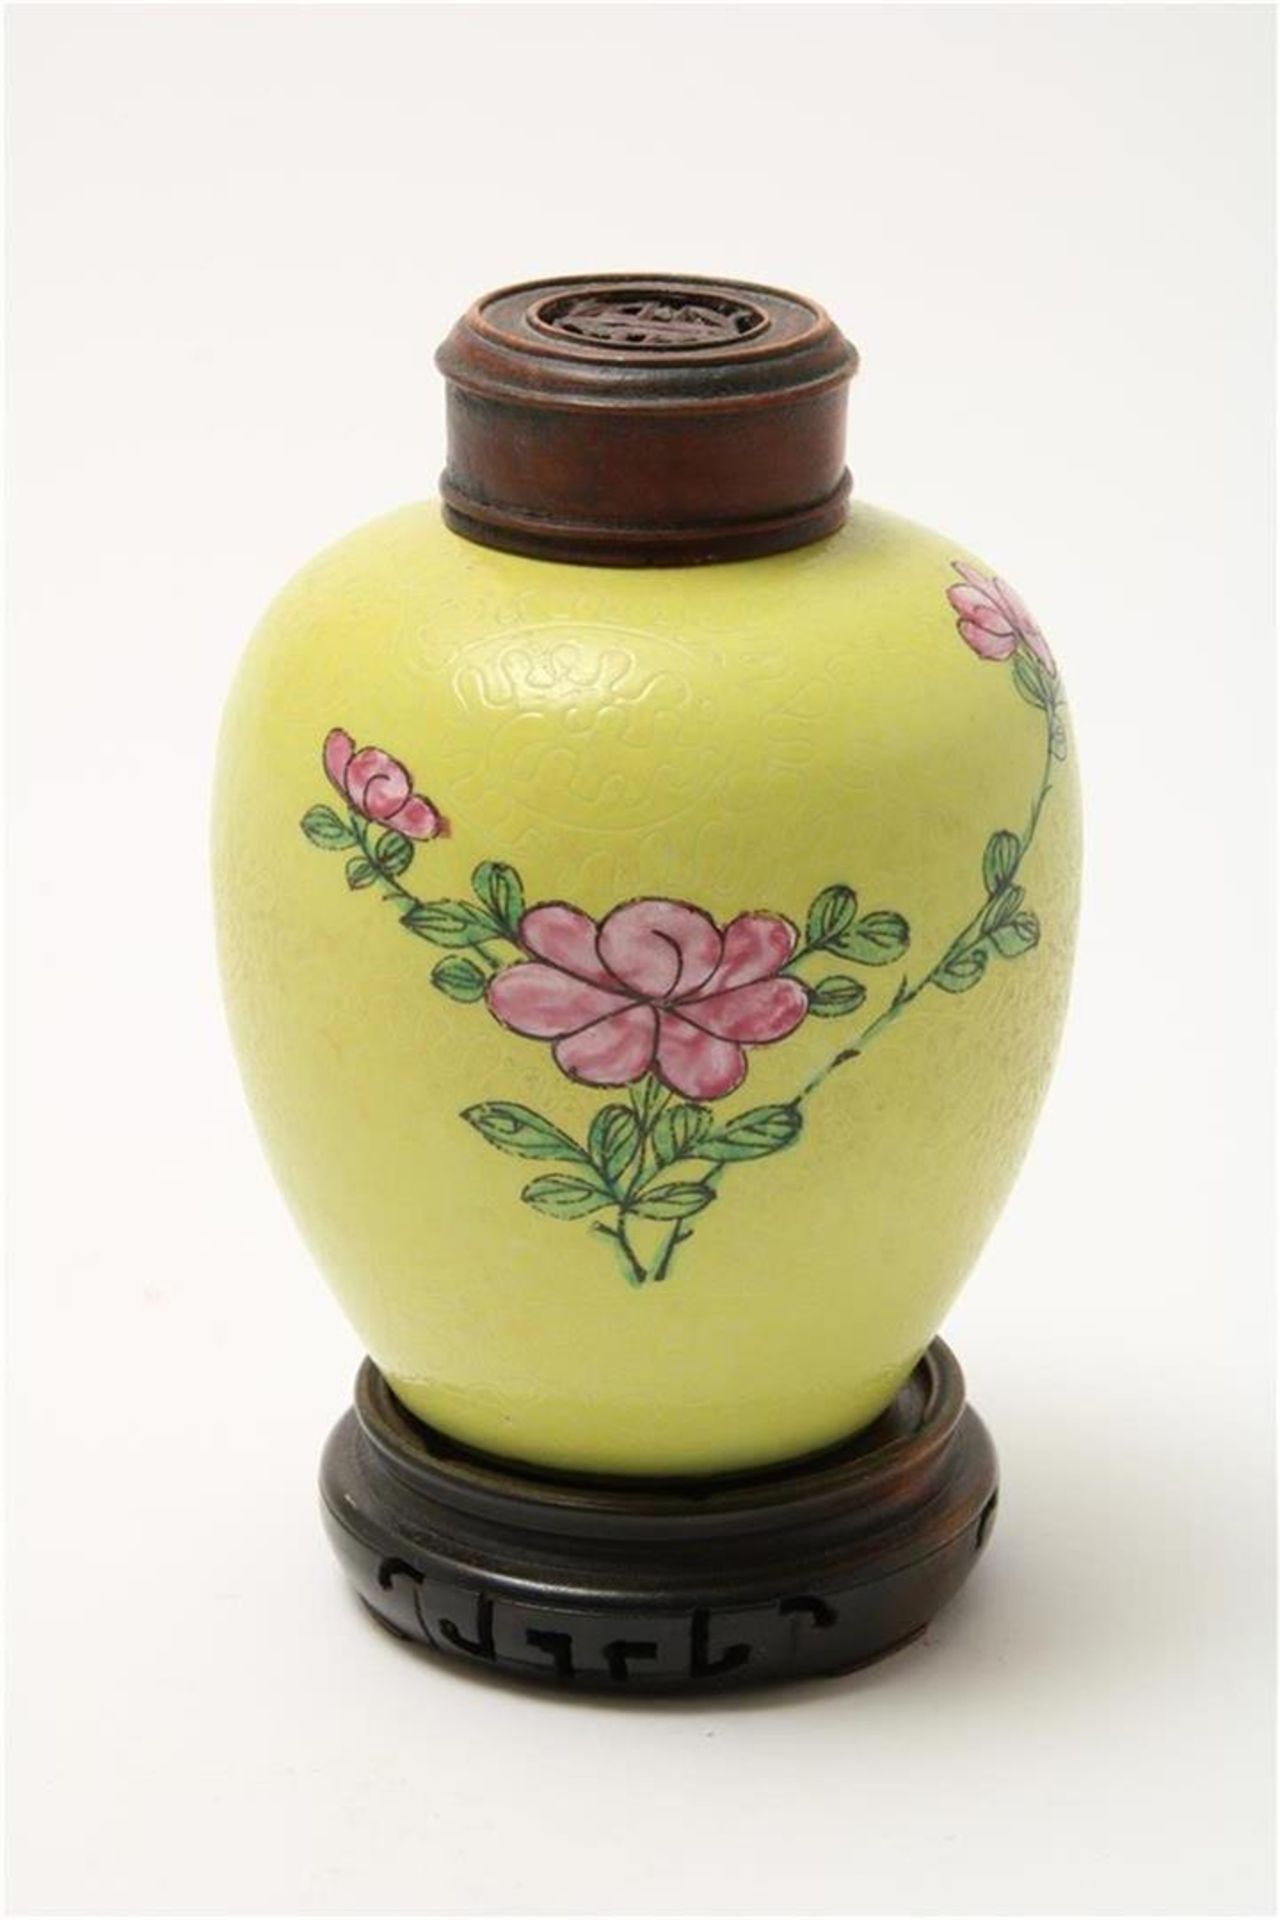 Porcelain famille jaune gingerpot decorated with pink flowers on wooden base and lid, China, h. 15